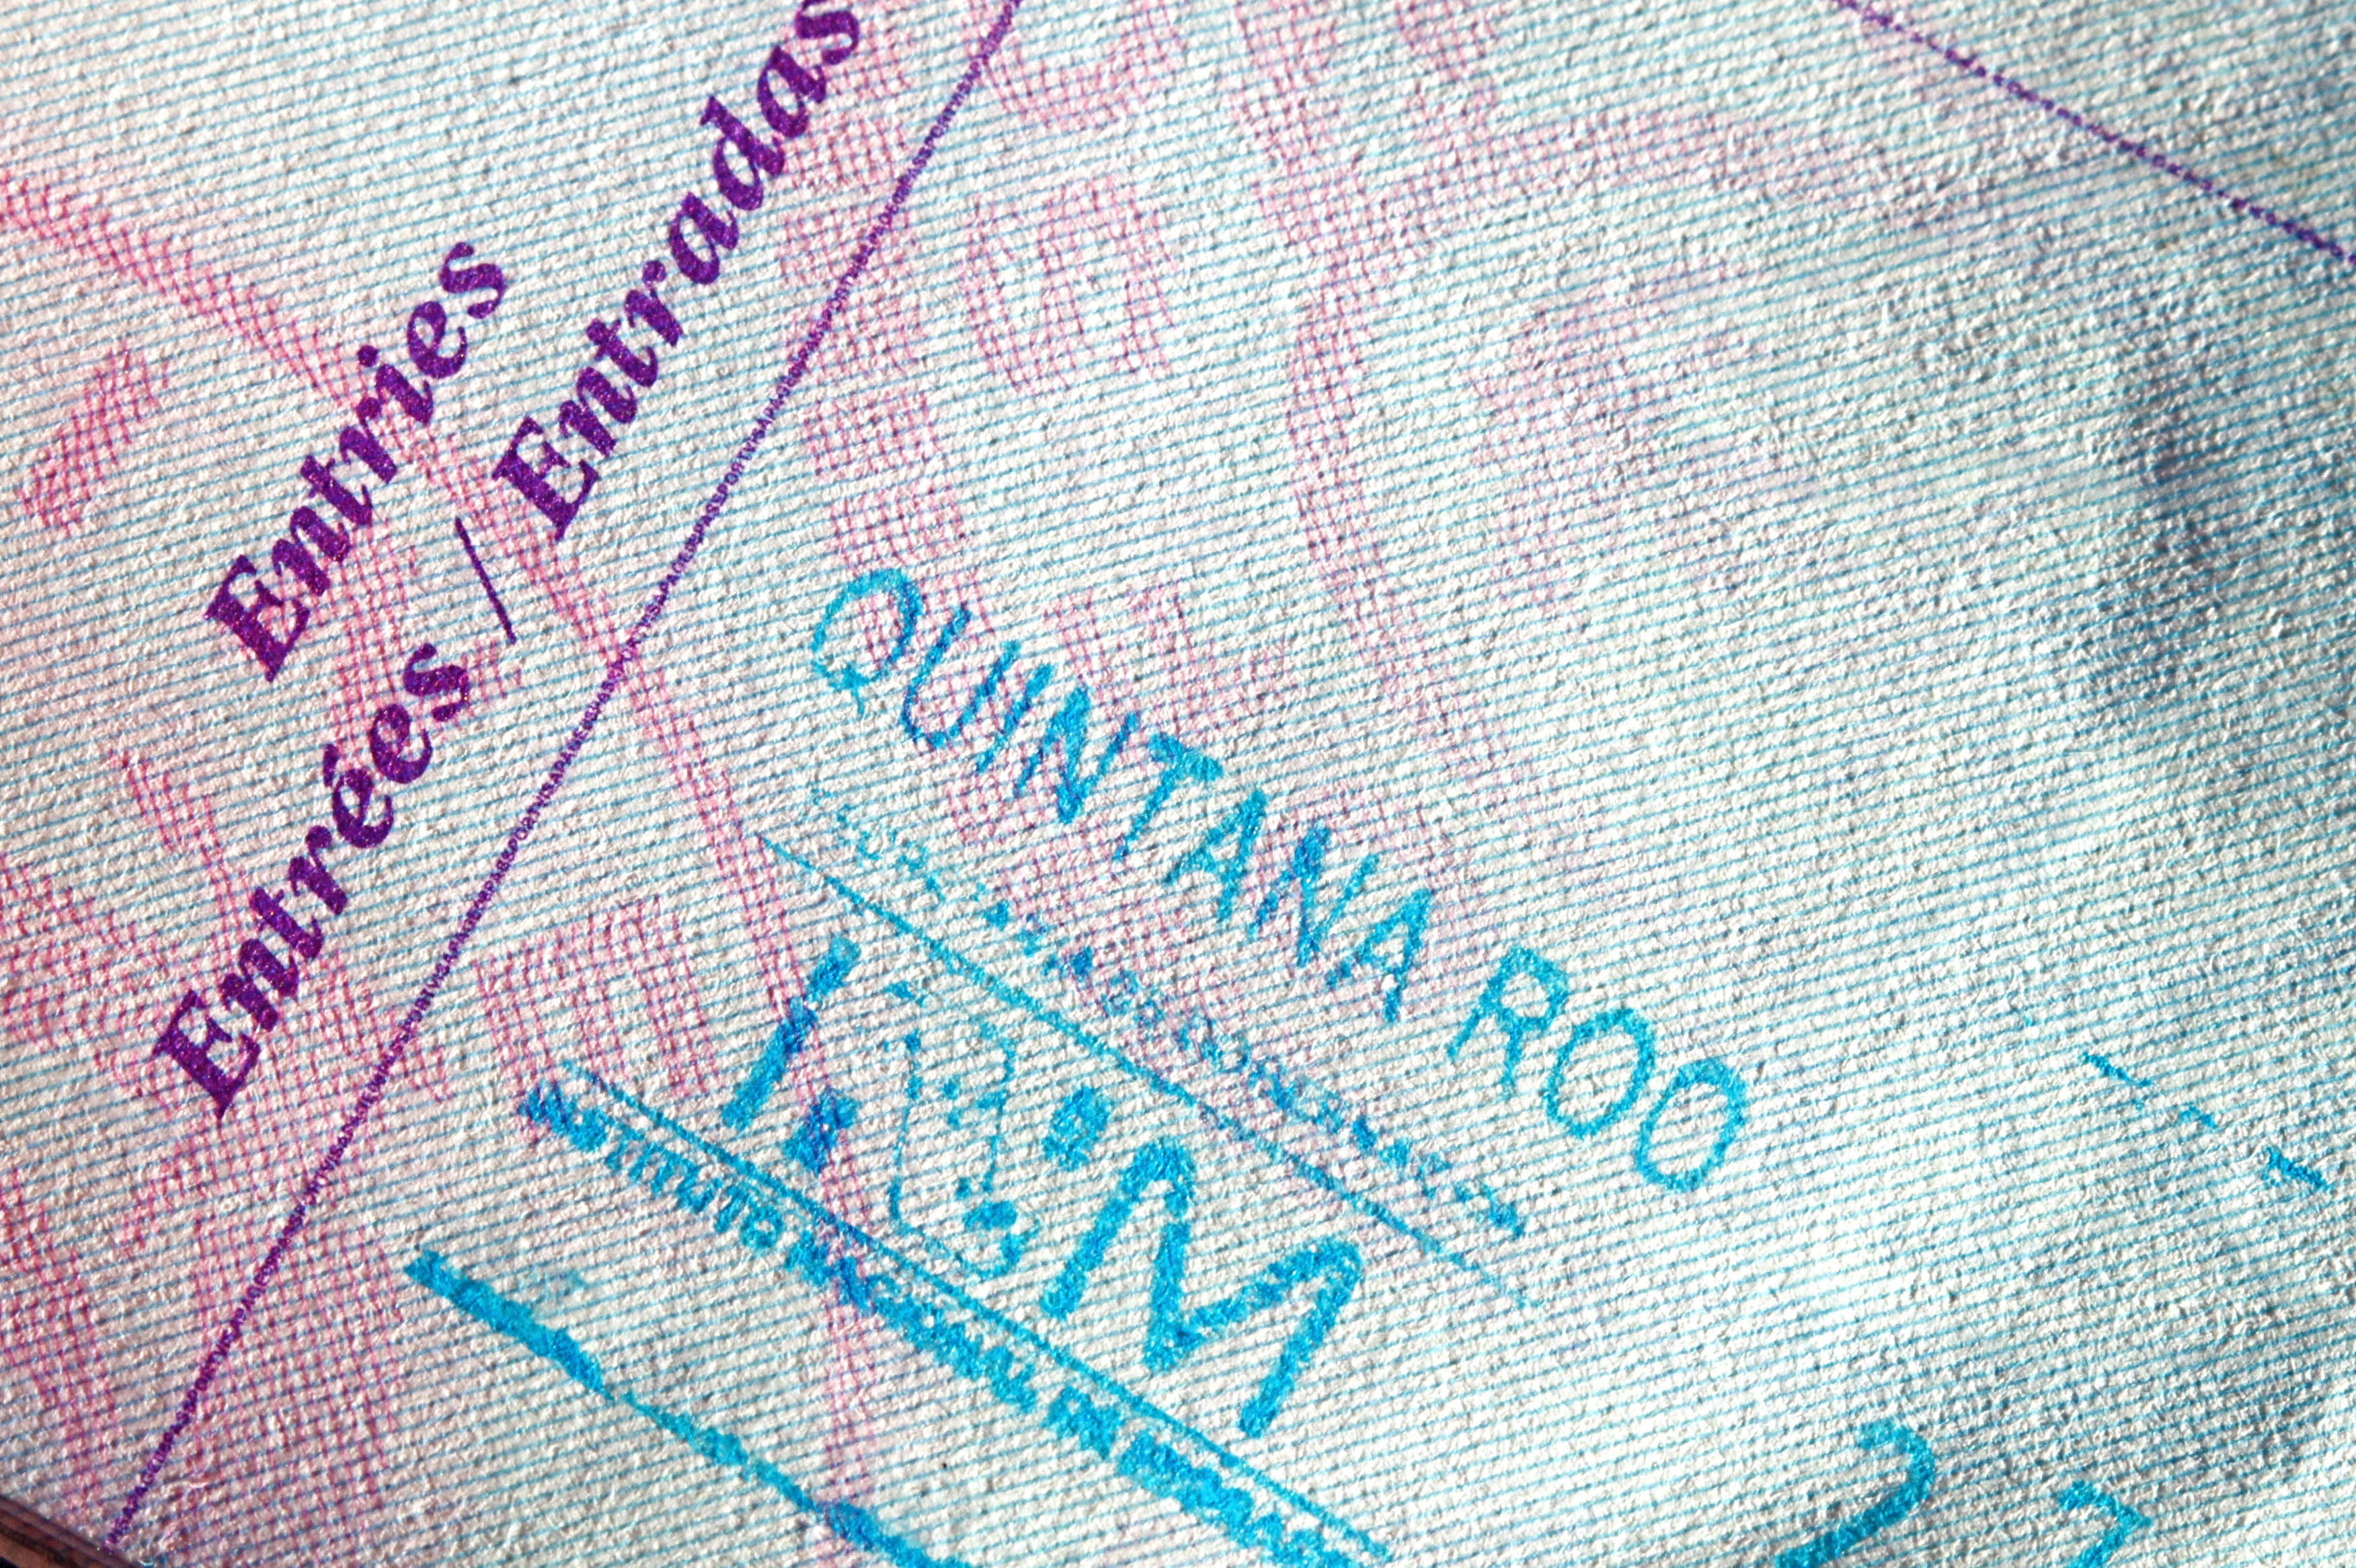 Mexico Immigration Stamp